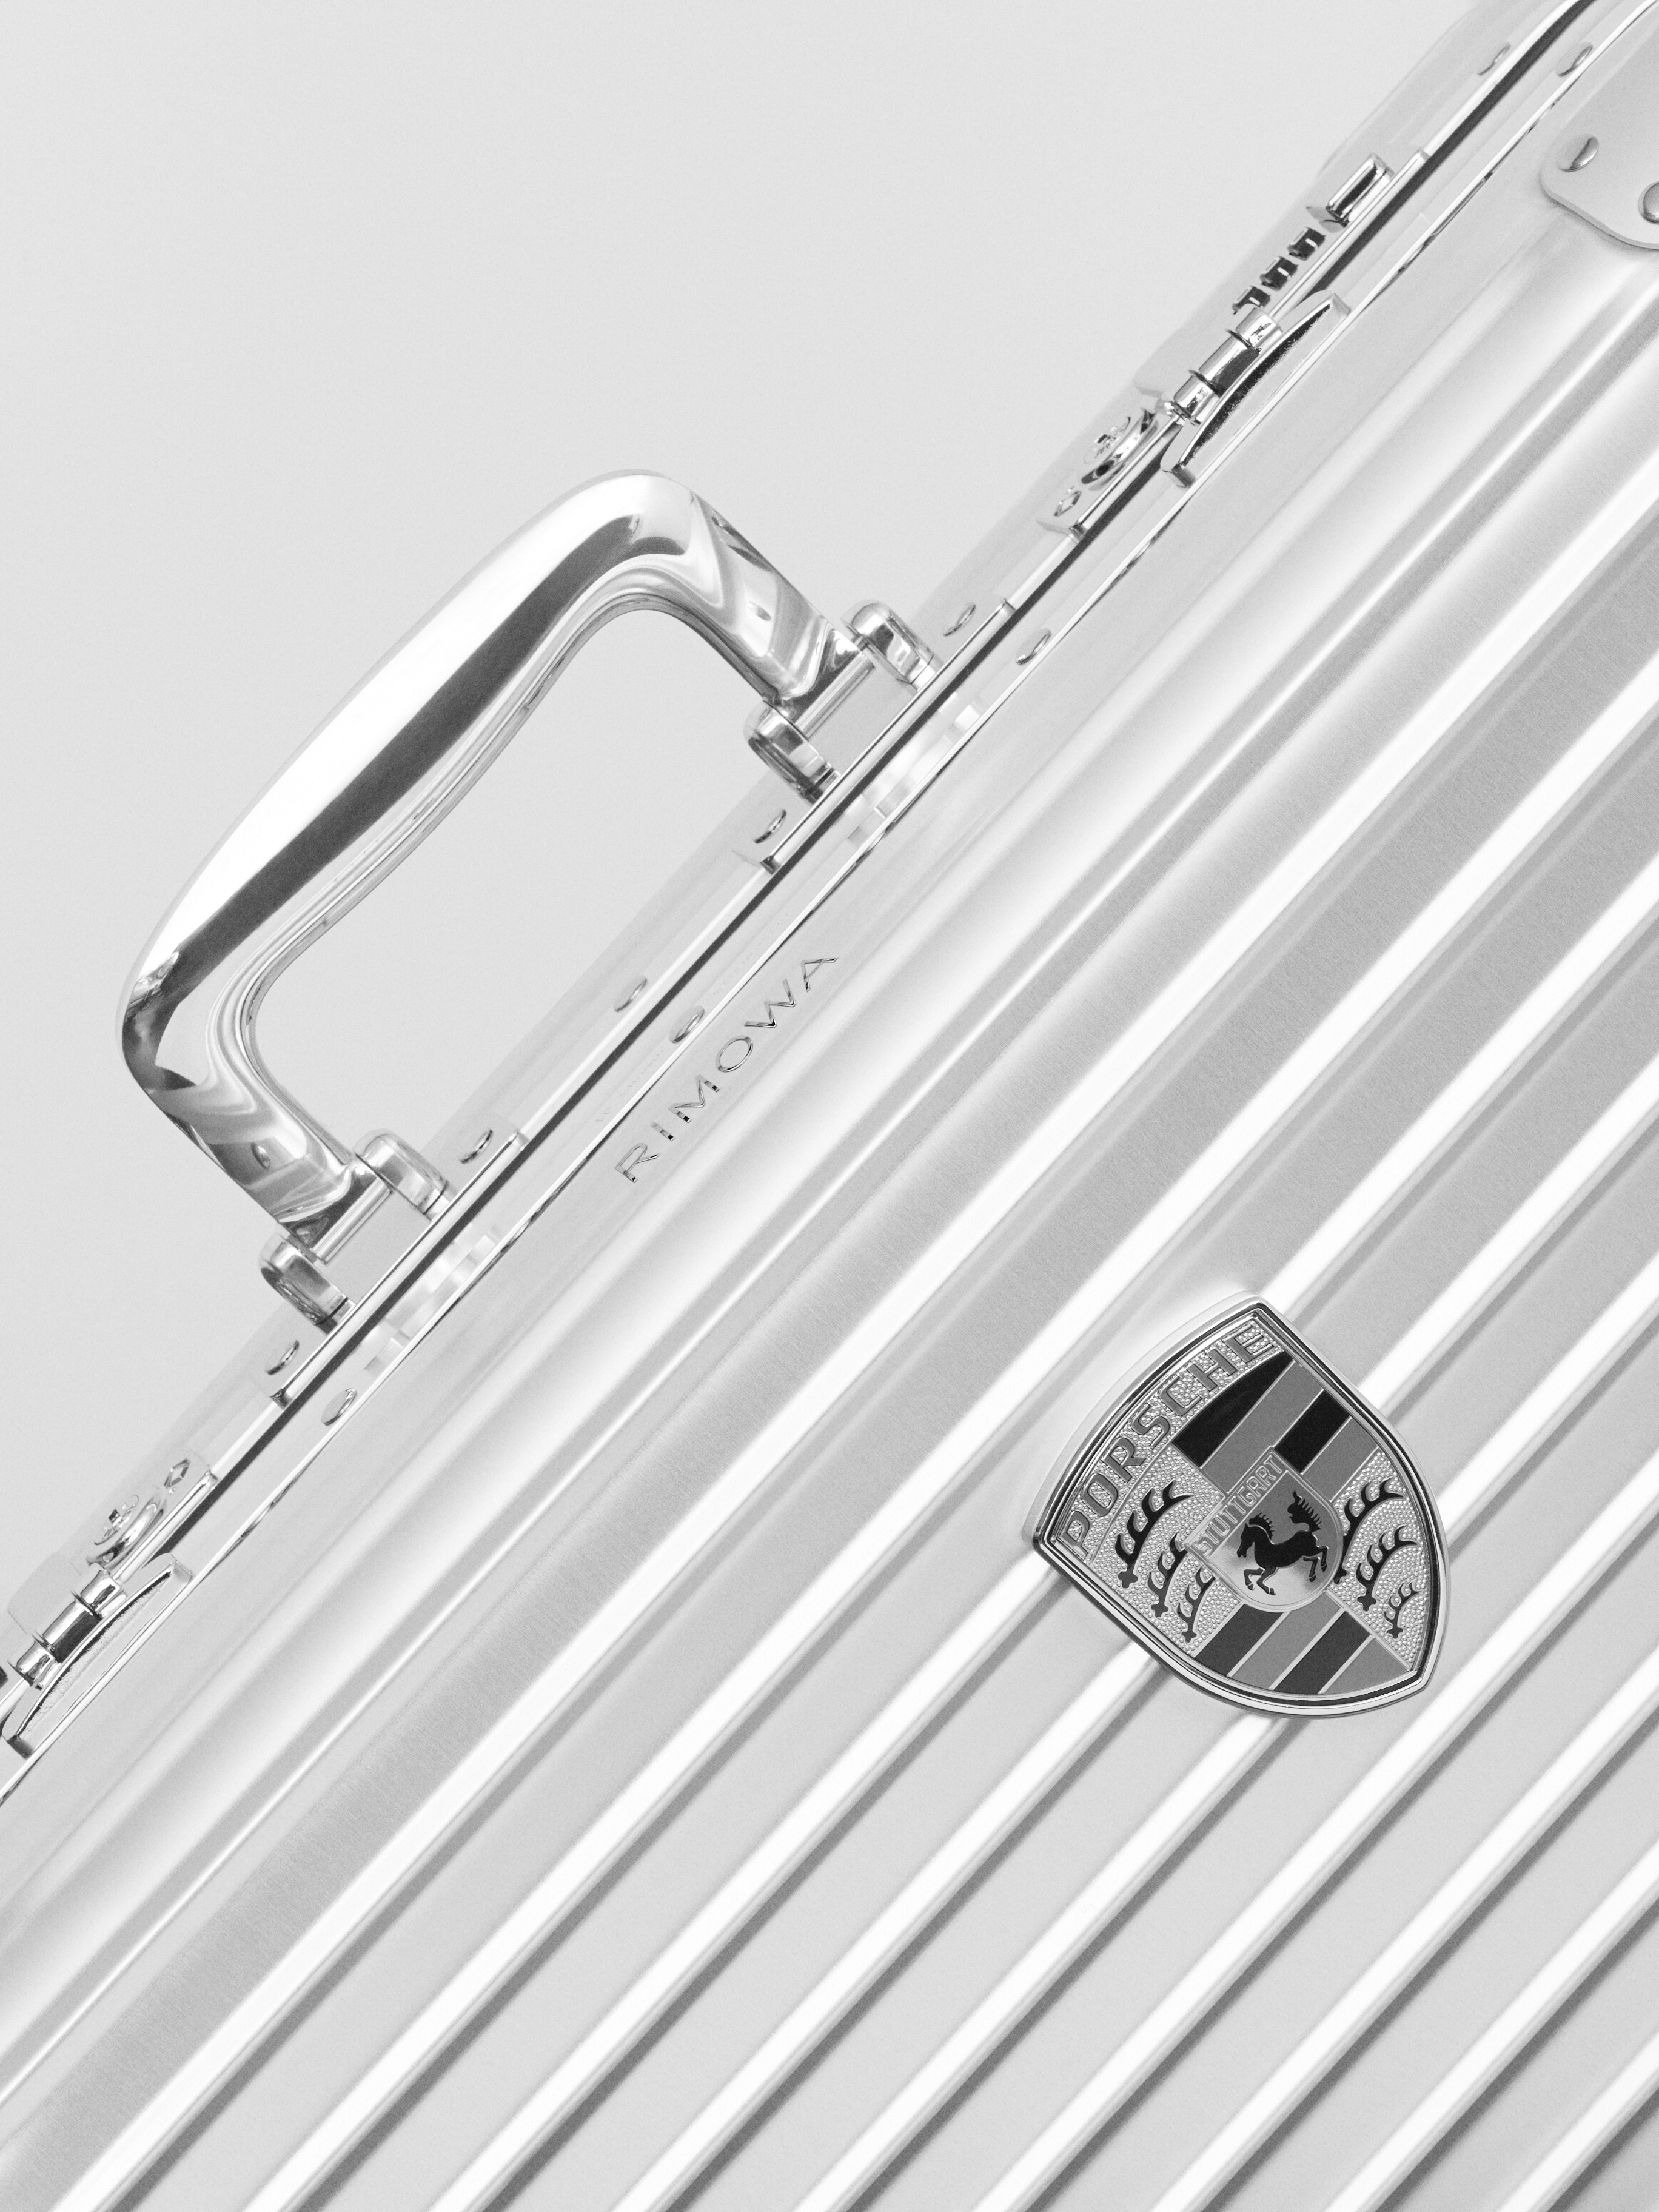 Close-up of metal RIMOWA suitcase with Porsche badge on front